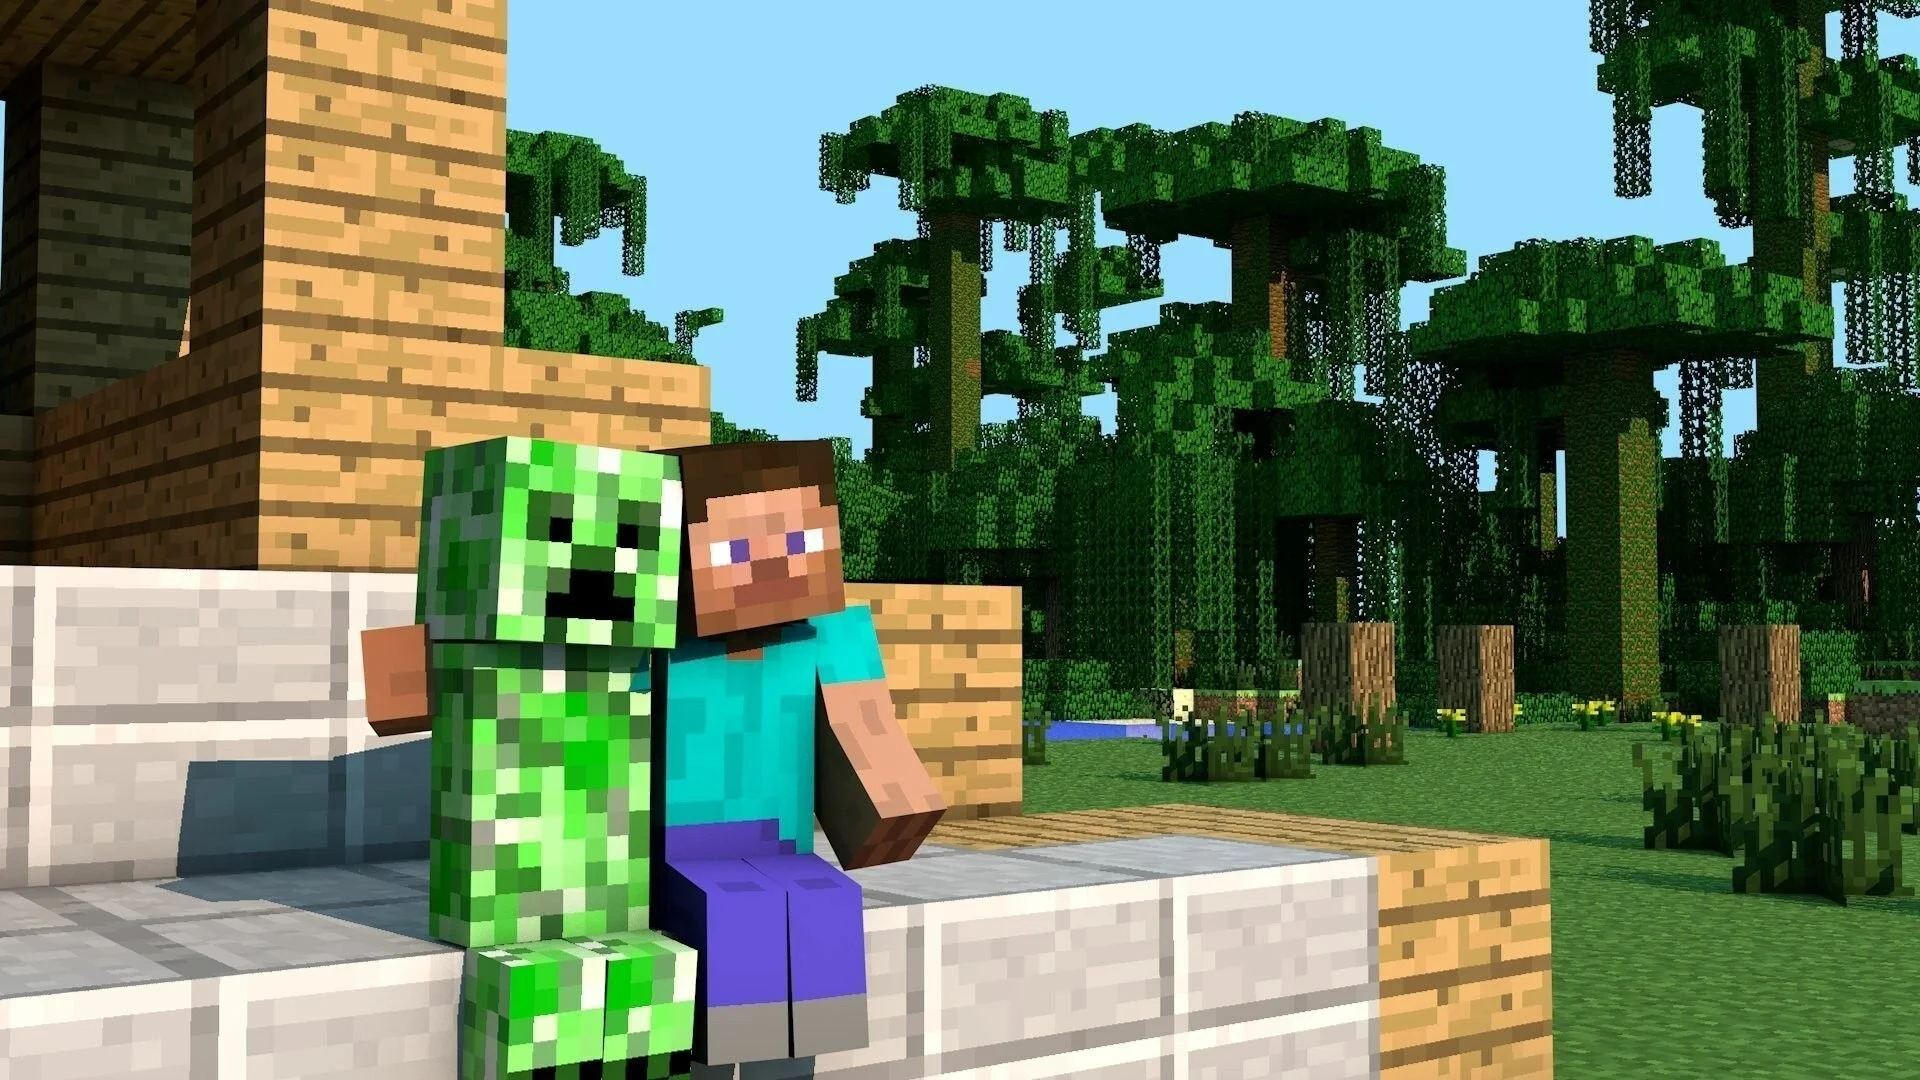 Minecraft may appear on Steam for the first time in history